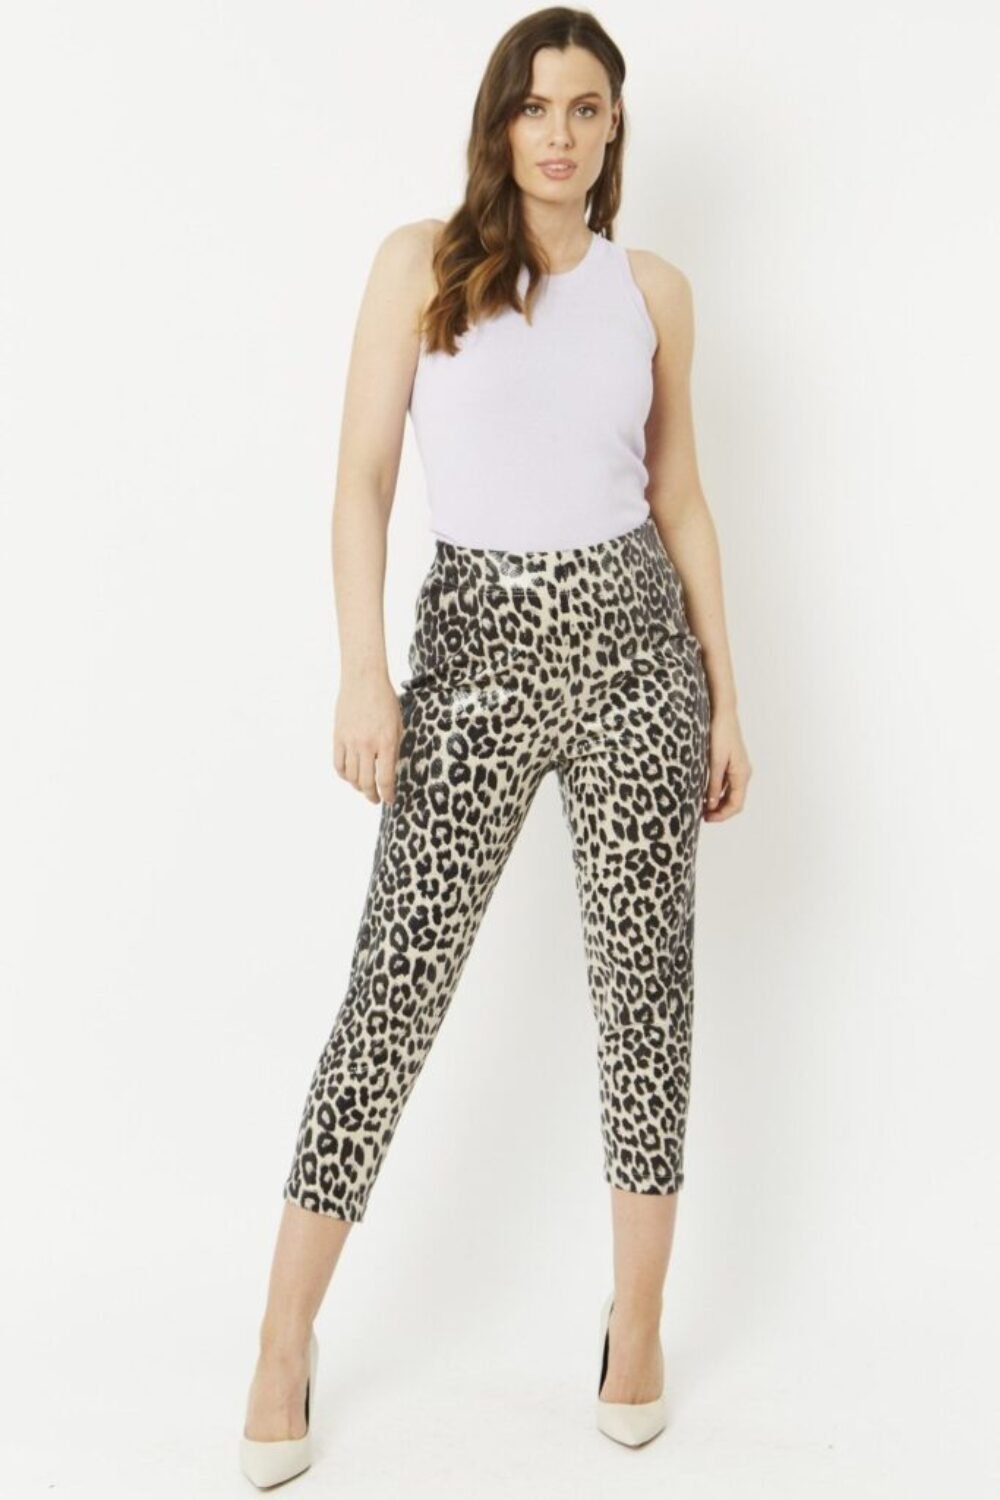 Shop Mono Leopard Leopard Print Faux Suede Trousers and women's luxury and designer clothes at www.lux-apparel.co.uk